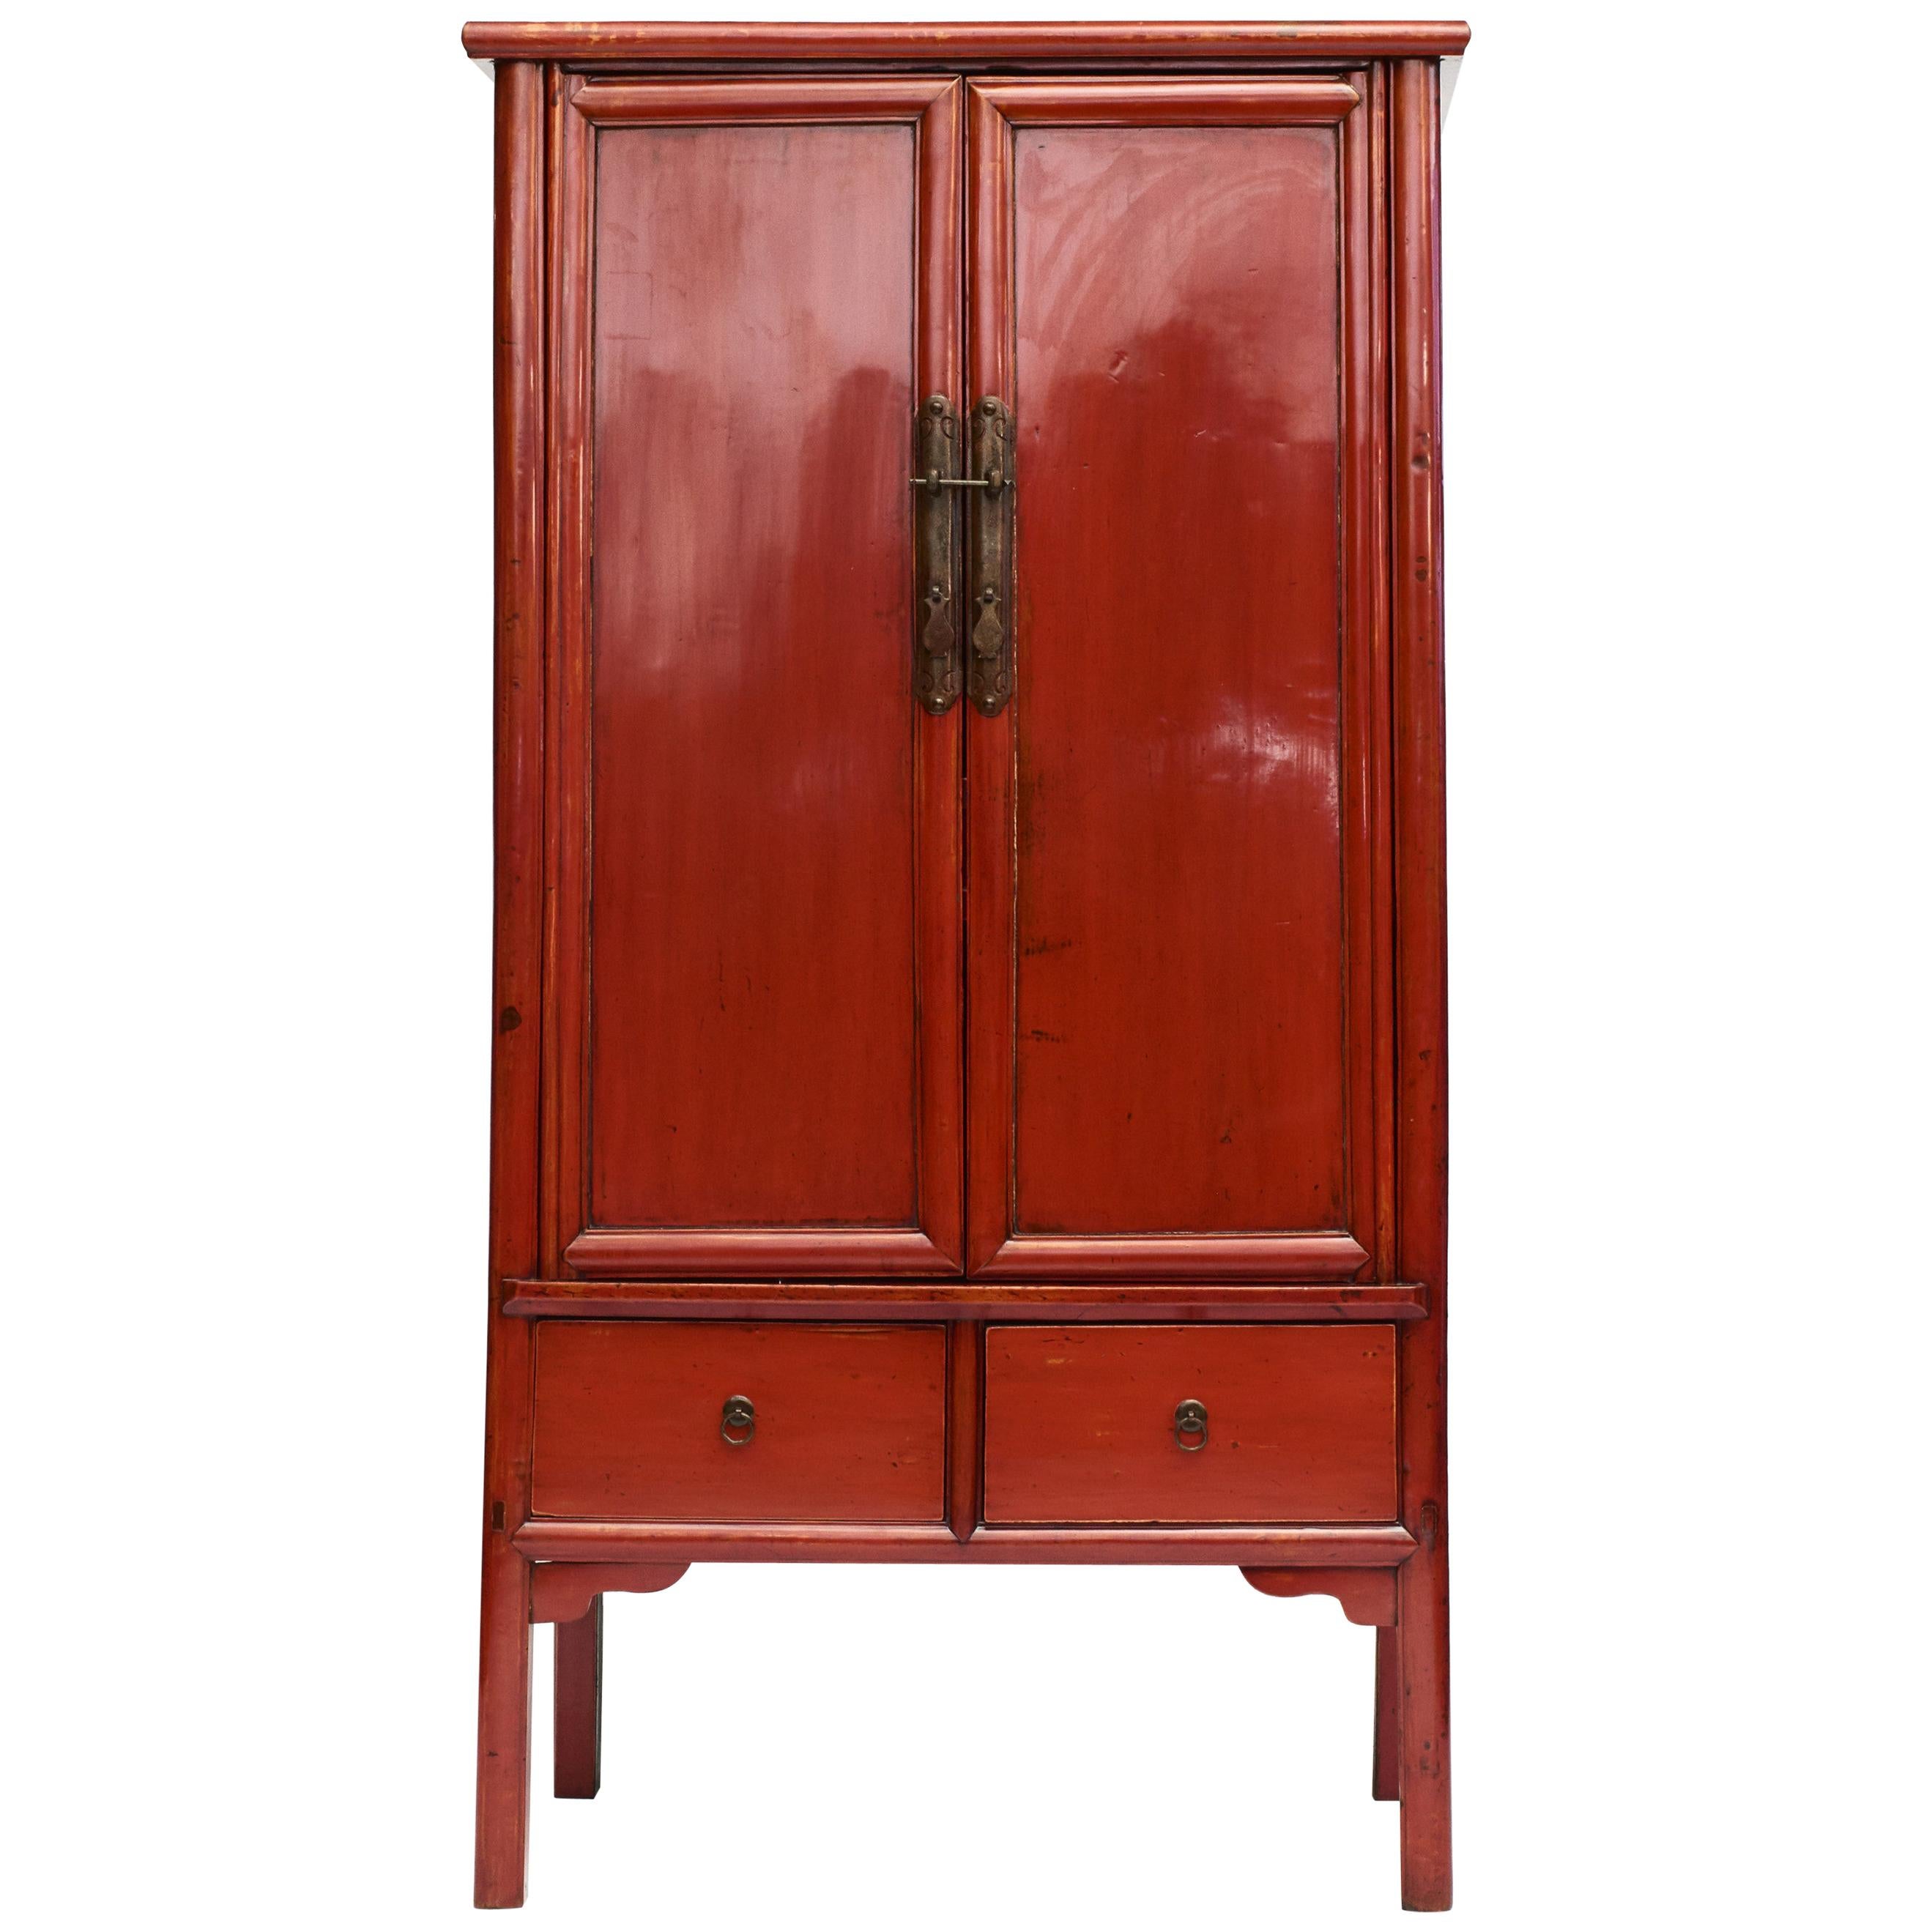 Chinese Ming Style Cabinet with Original Red Lacquer, 1840-1860